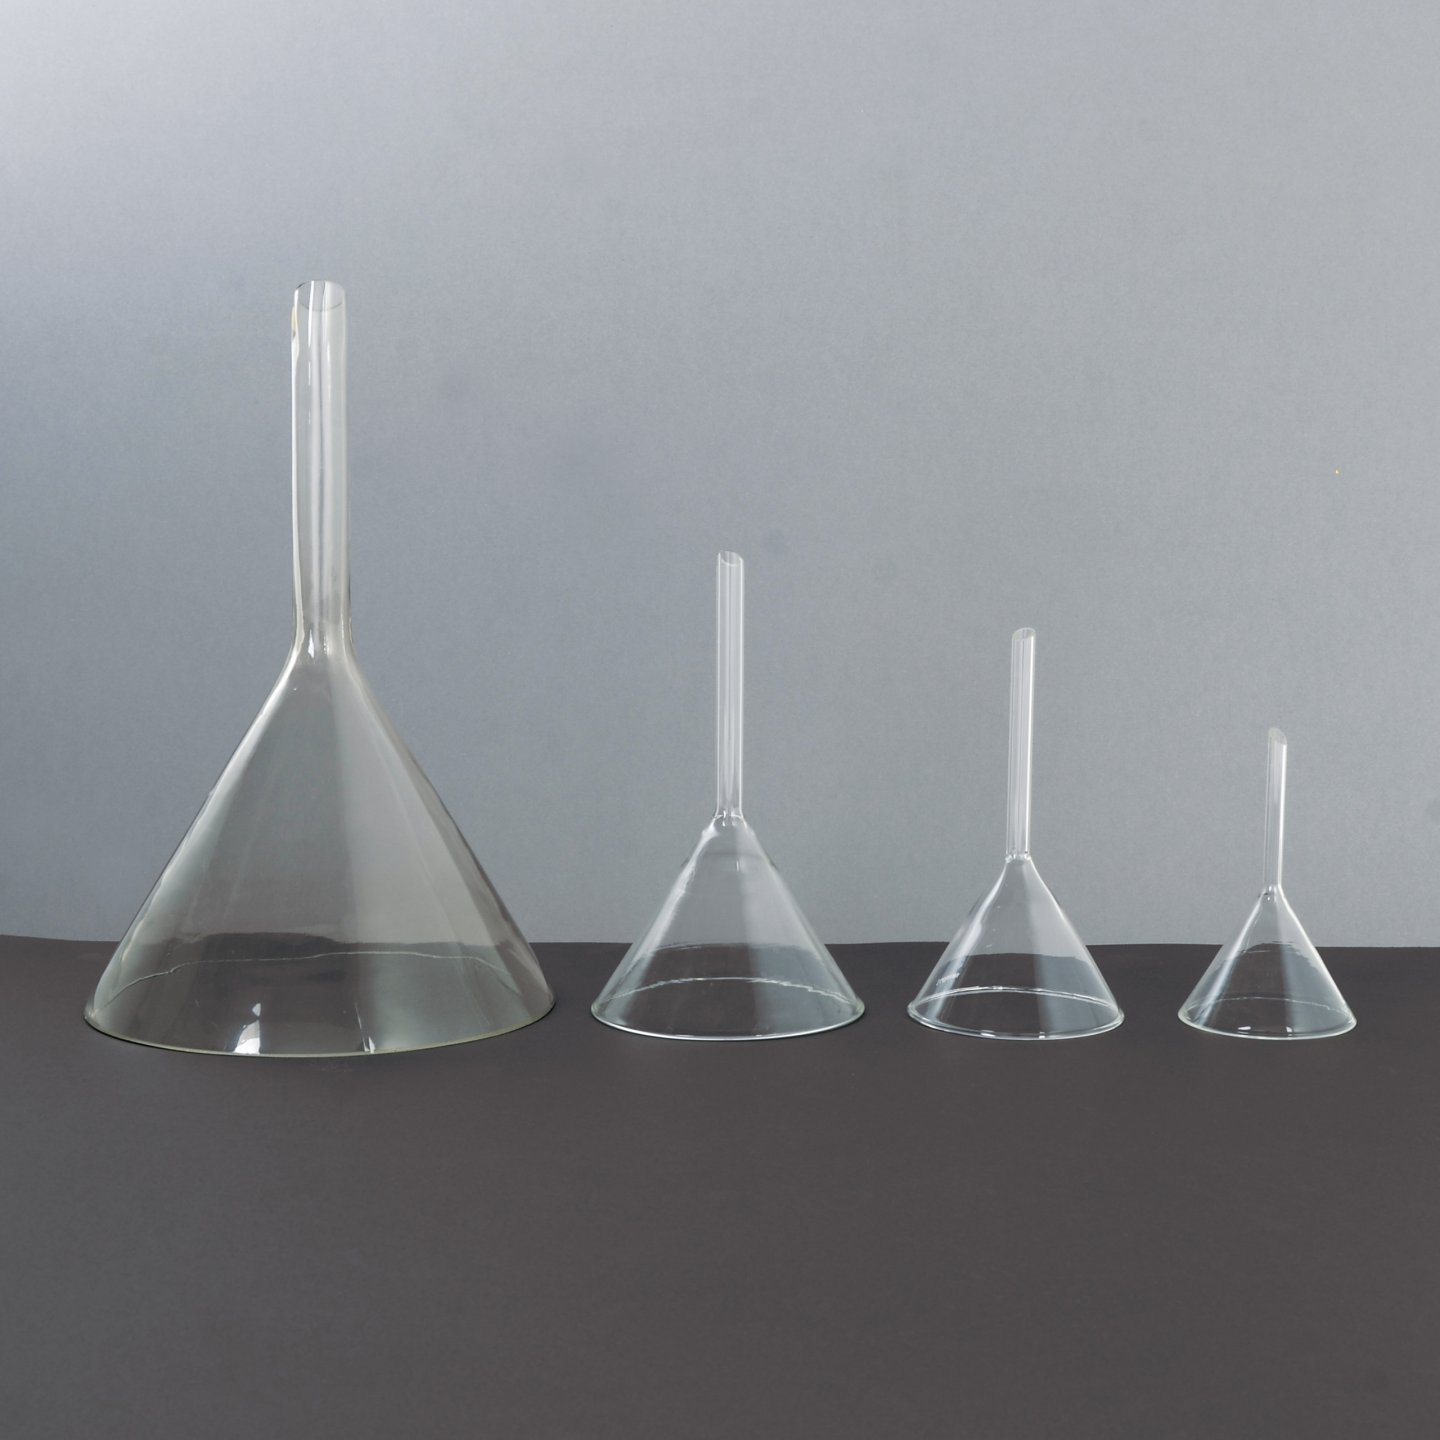 Glass Bell Teaching Instrument Experiment Teaching Aid Funnel Laboratory Equipment Borosilicate Transparent Experiment/A/L 